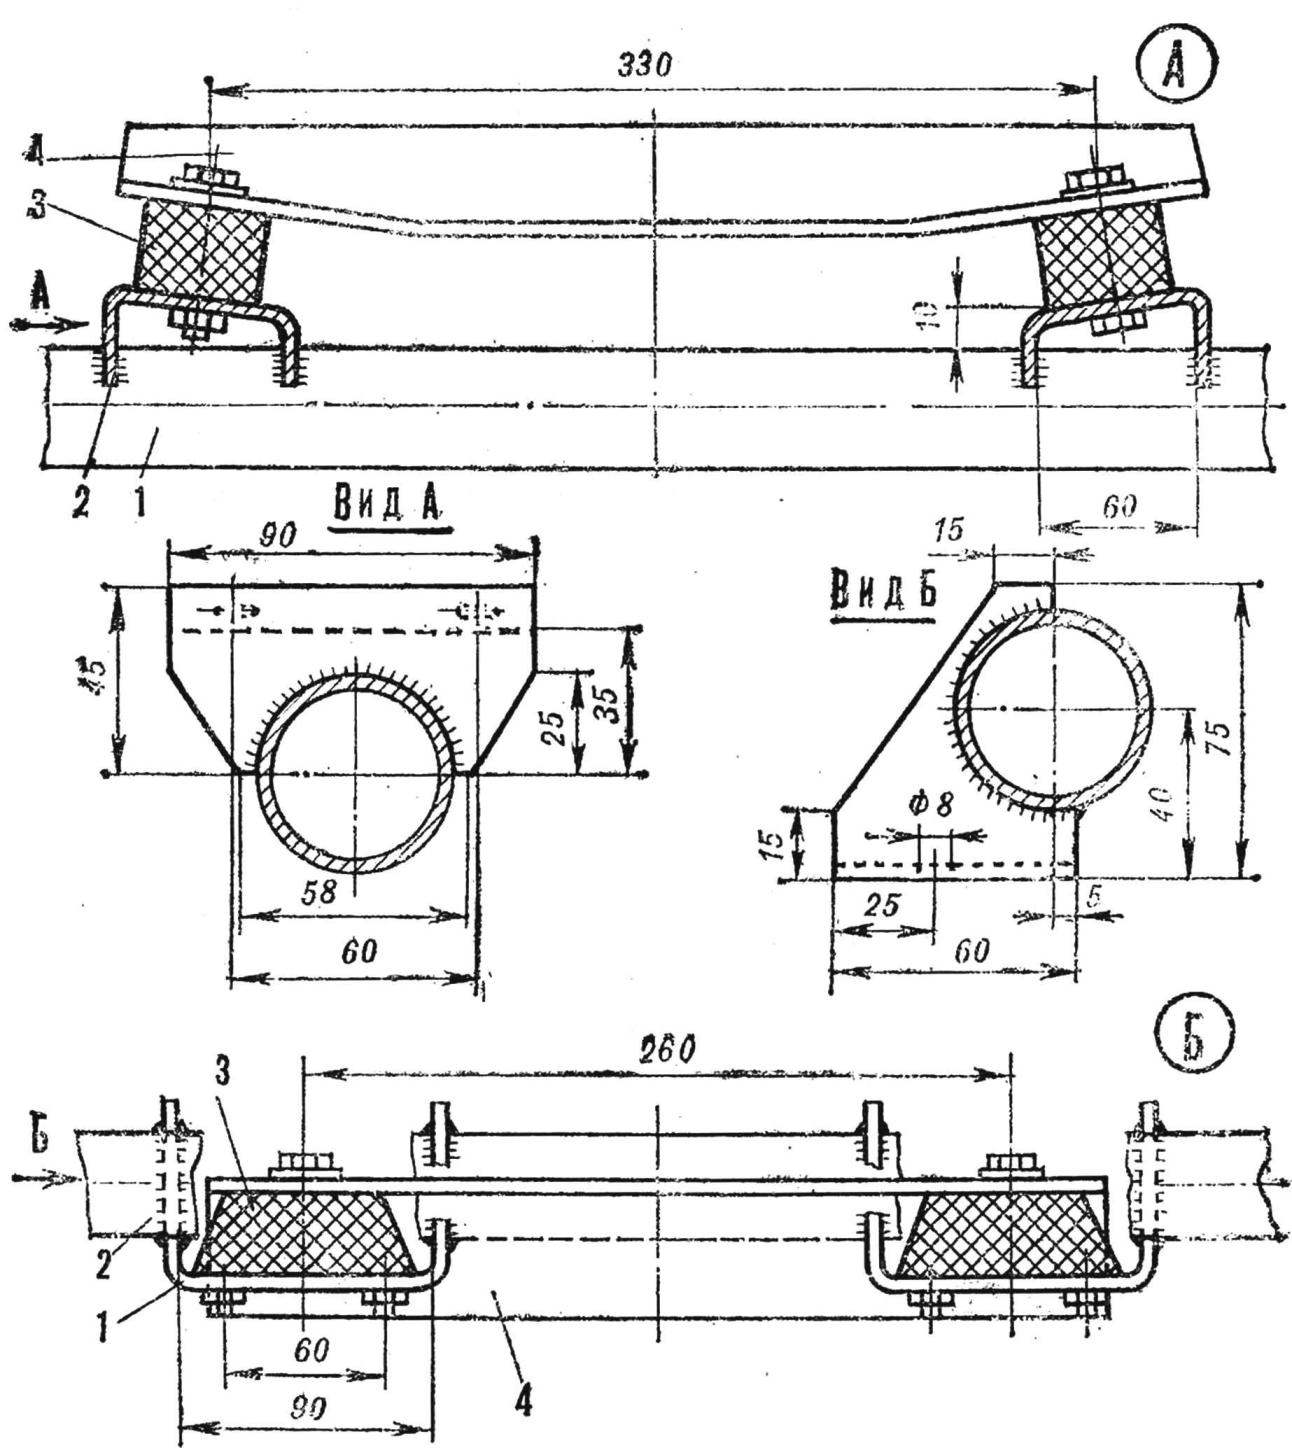 Fig. 6. Mount the subframe to the frame of the car